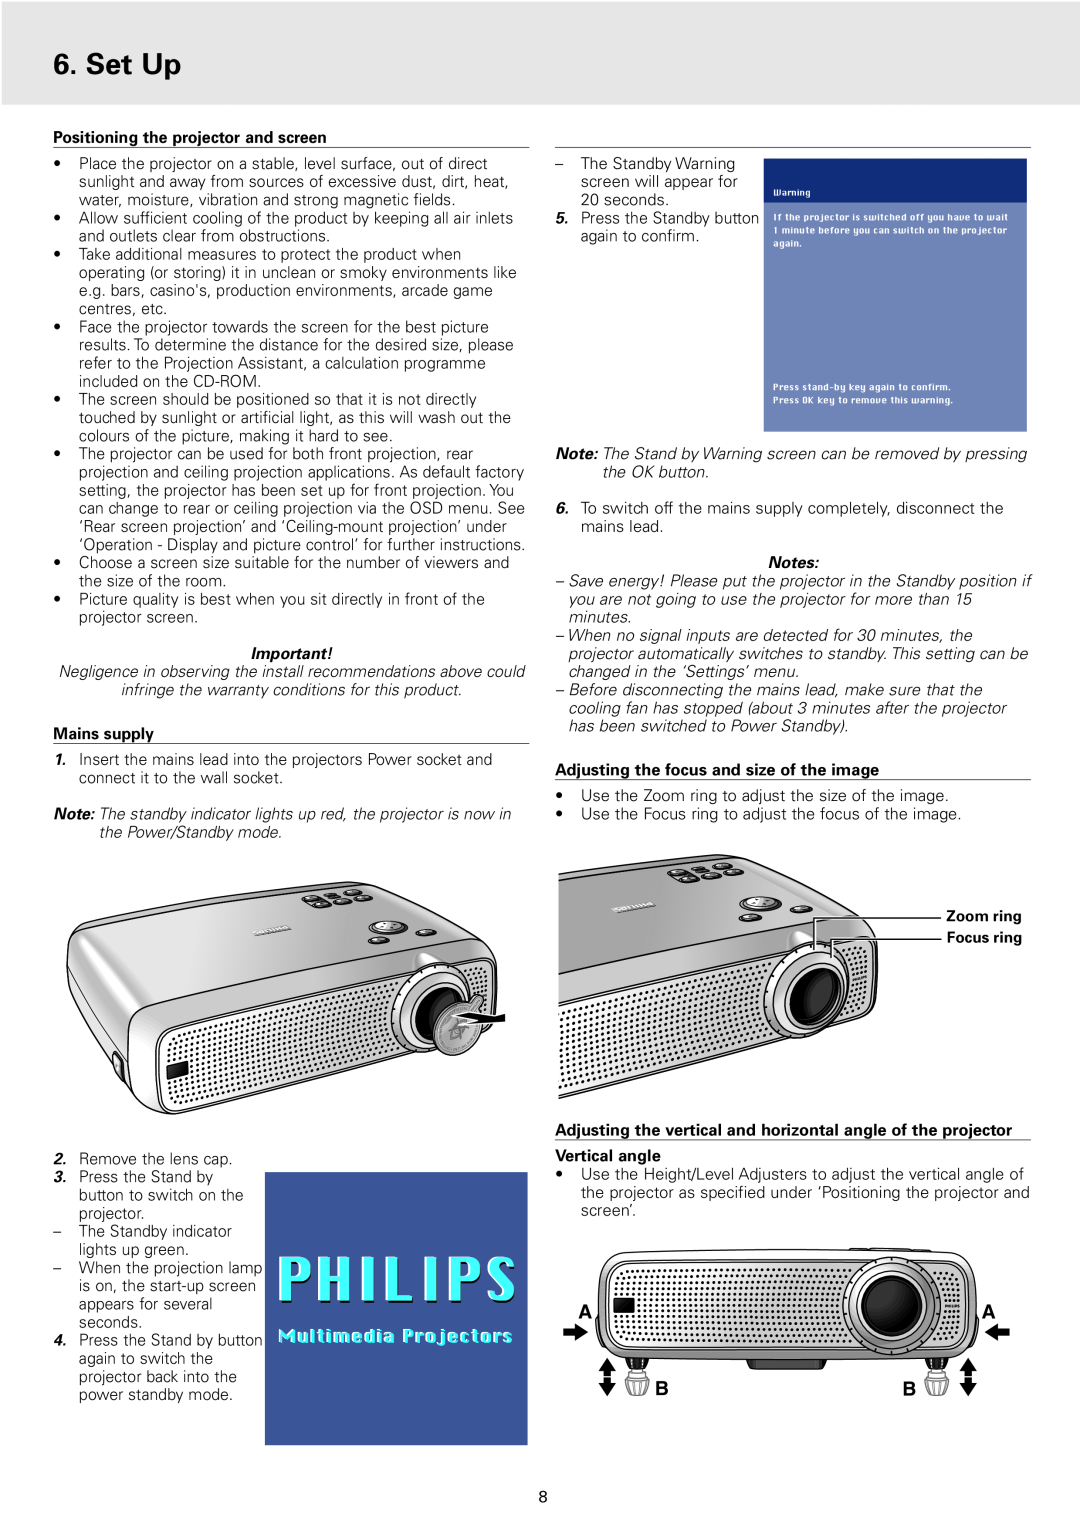 Philips 2 Series manual Set Up, Philips, Multimedia Projectors, Positioning the projector and screen, Mains supply 